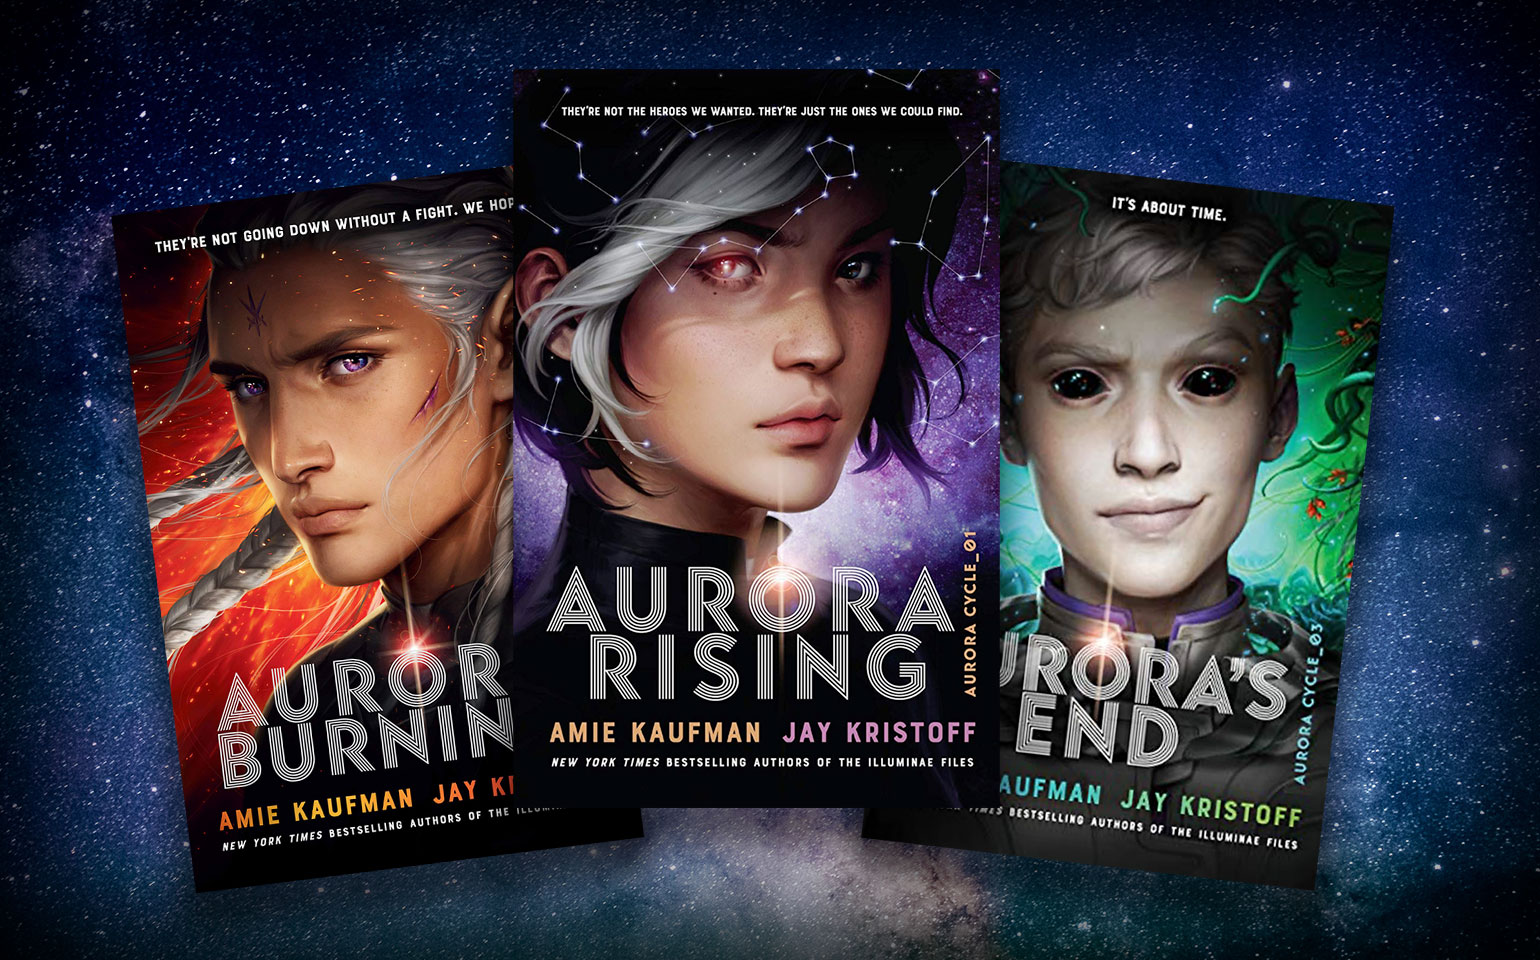 The covers of all three books in the Aurora Cycle trilogy are shown.